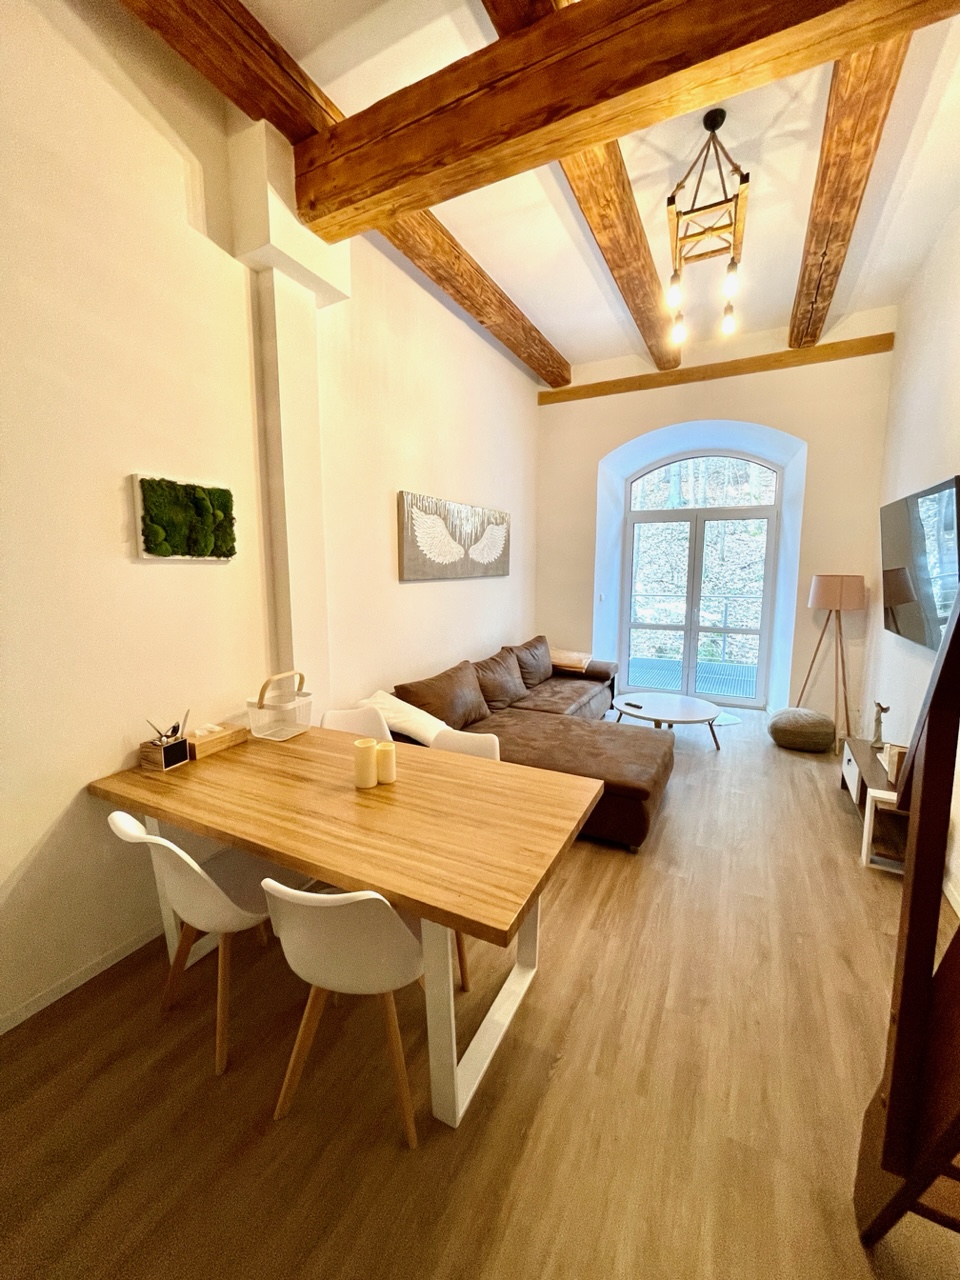 Exclusive sale of mountain apartments in Černý Důl - Apartments Černý Důl